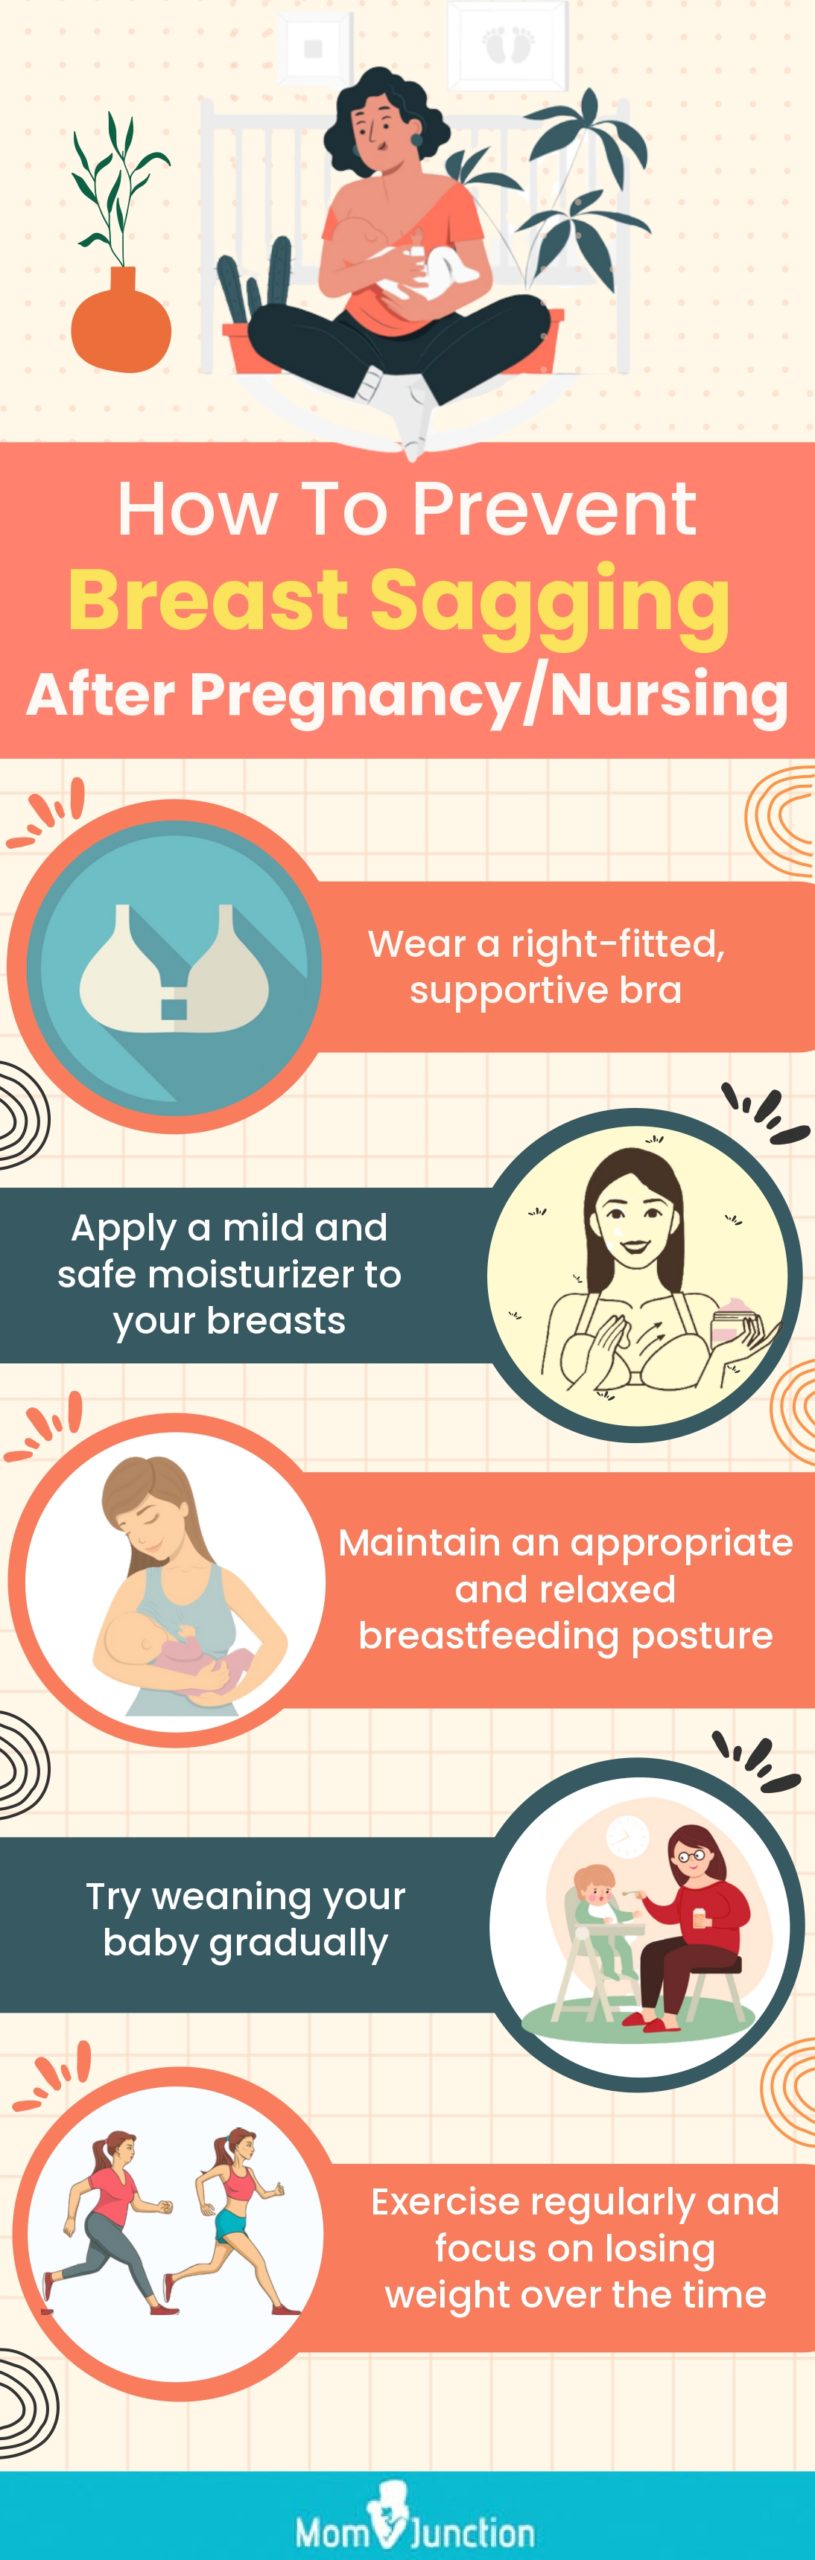 how to prevent breast sagging after pregnancy/nursing (infographic)